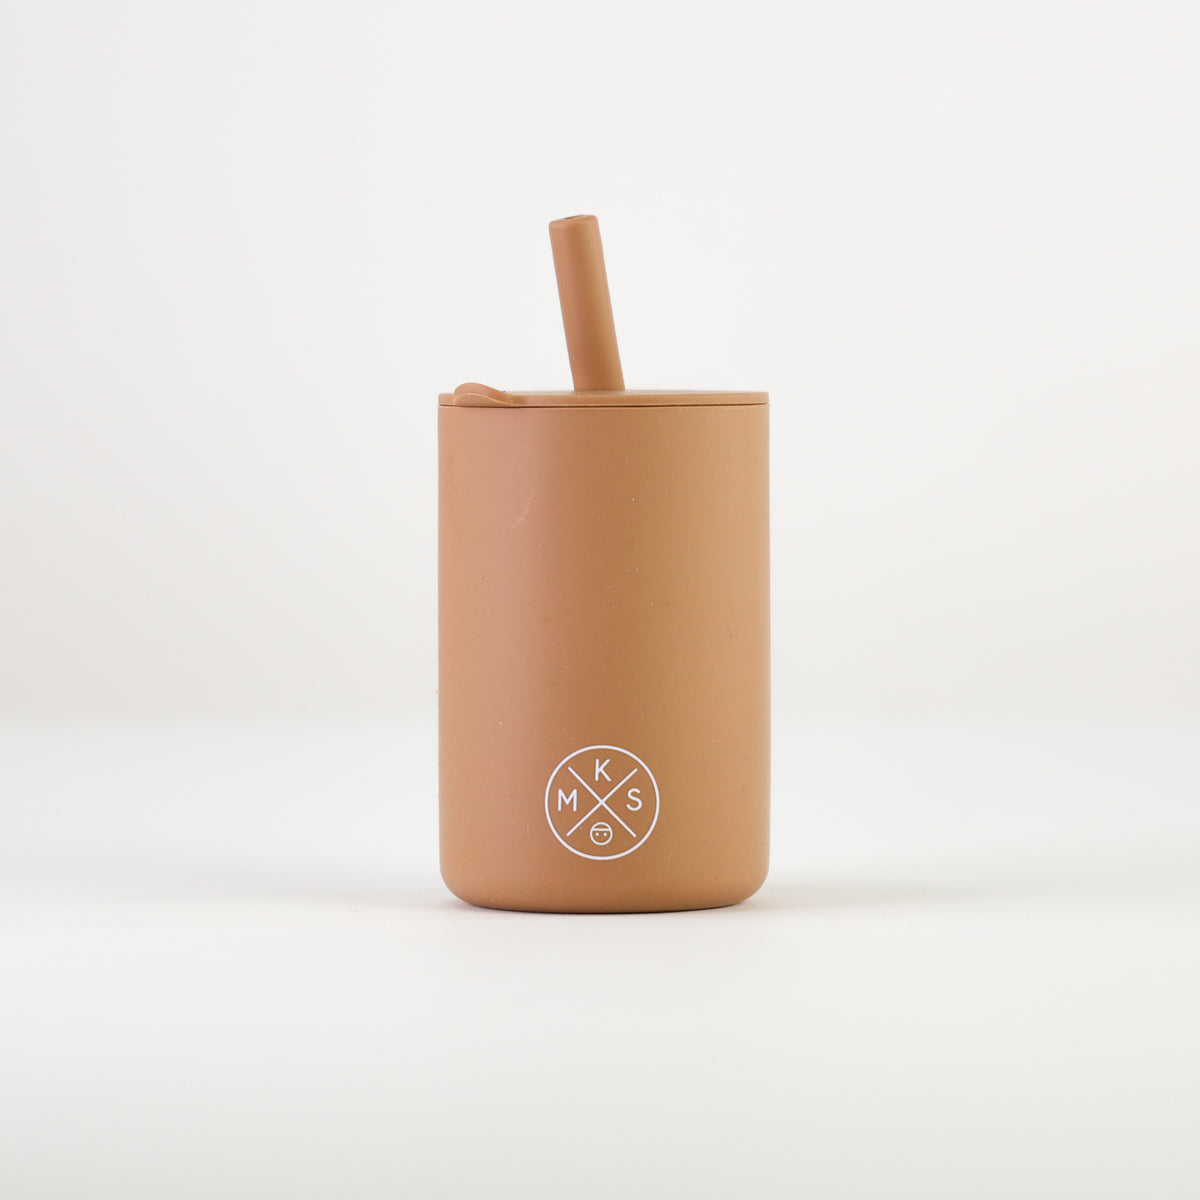 Drinking cup with straw babies toddlers kids silicone reusable durable unbreakable dinnerware mks miminoo arizona usa taupe brown